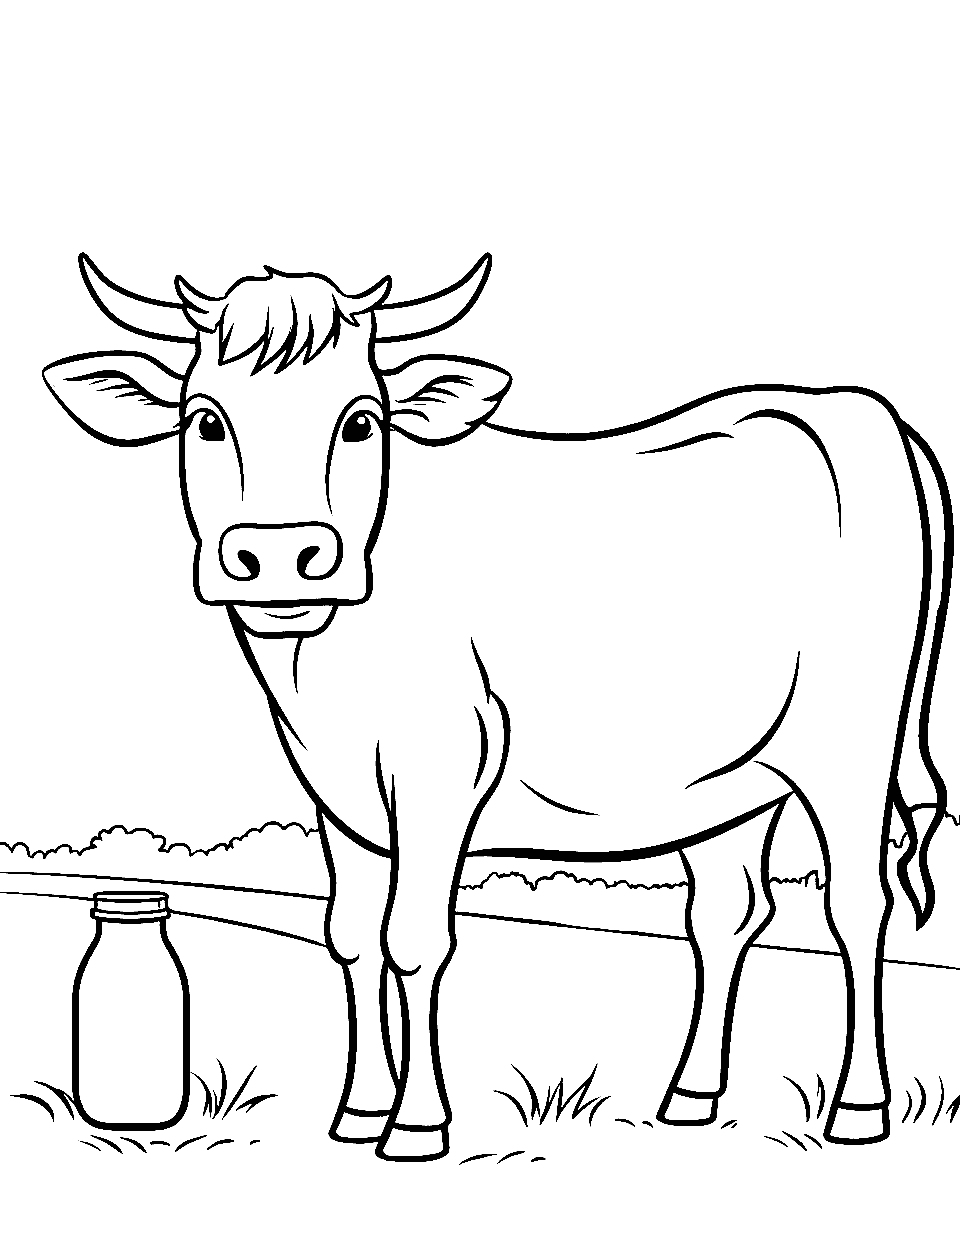 Cow and a Milk Bottle Coloring Page - A cow beside a milk bottle in a simple pasture setting.